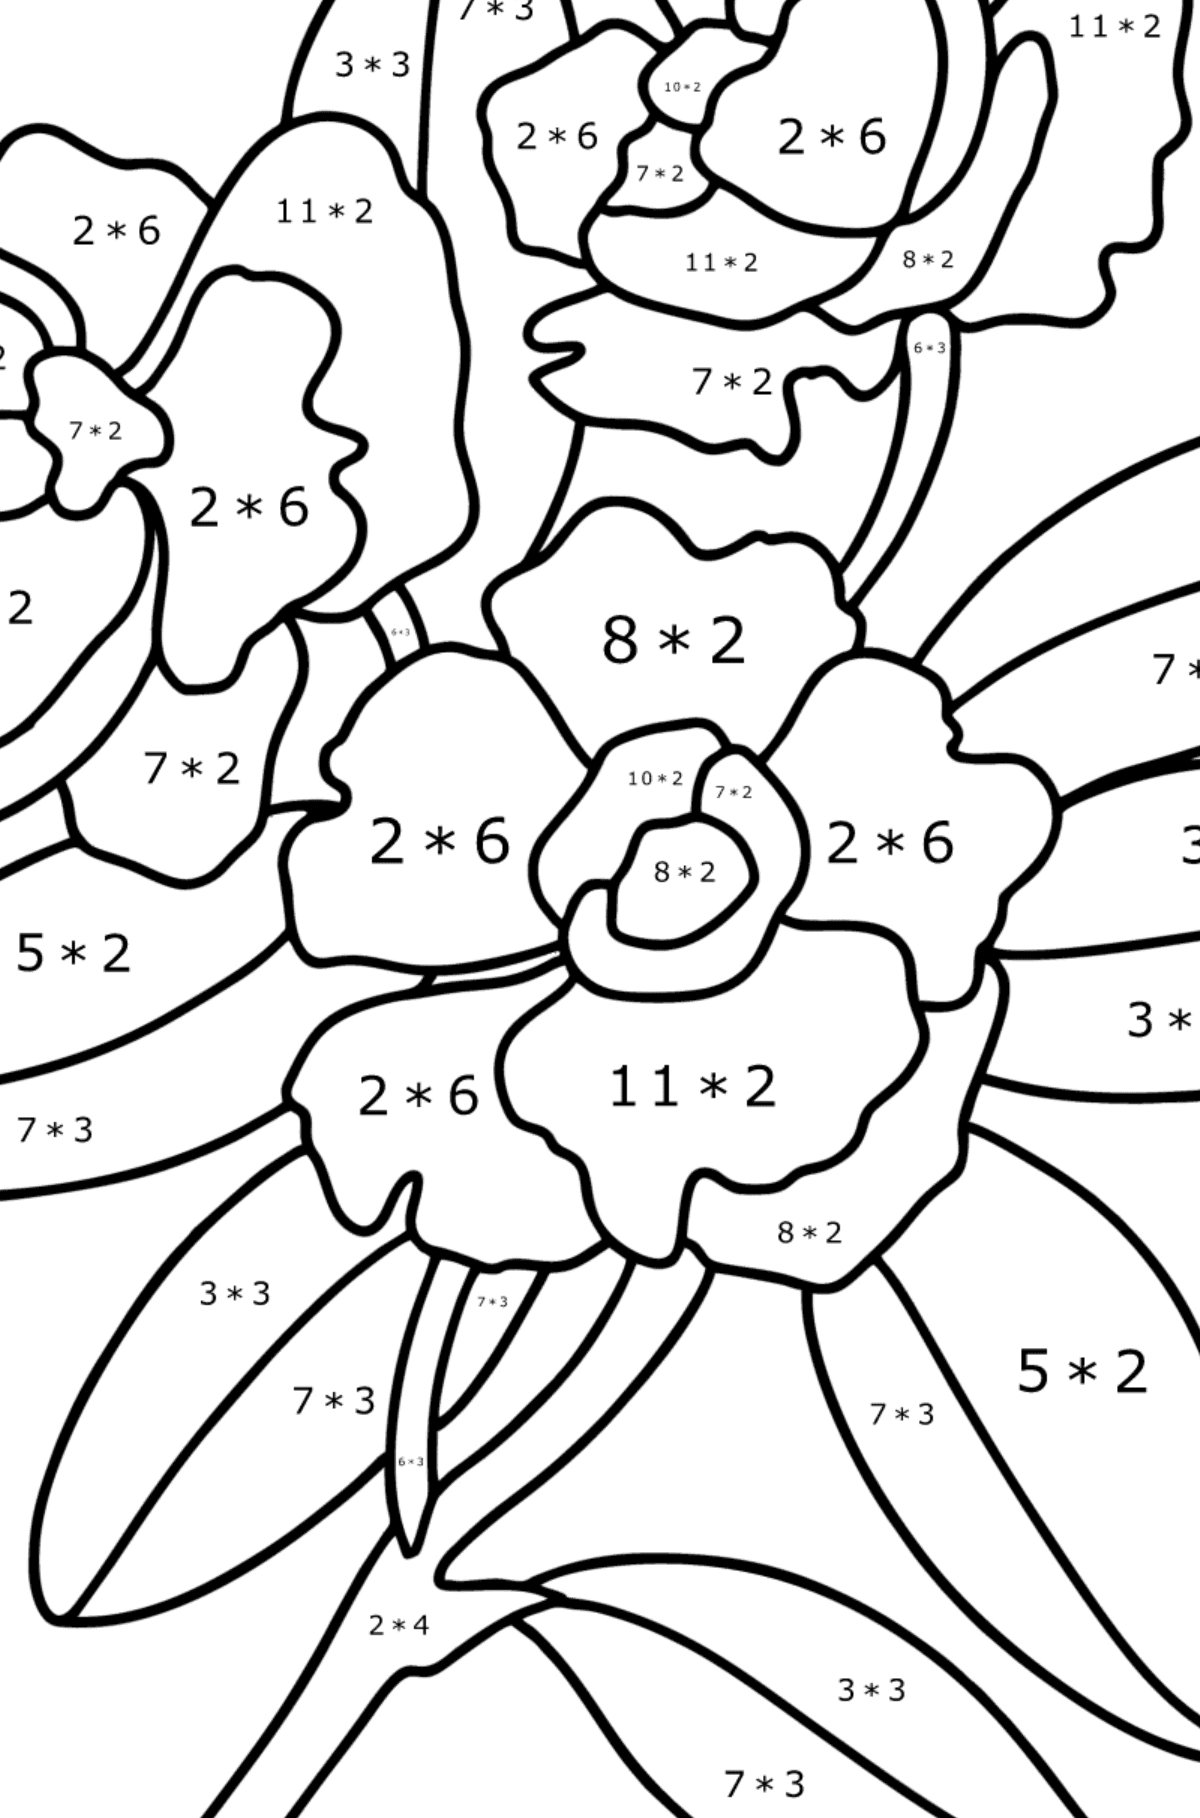 Gardenia coloring page - Math Coloring - Multiplication for Kids